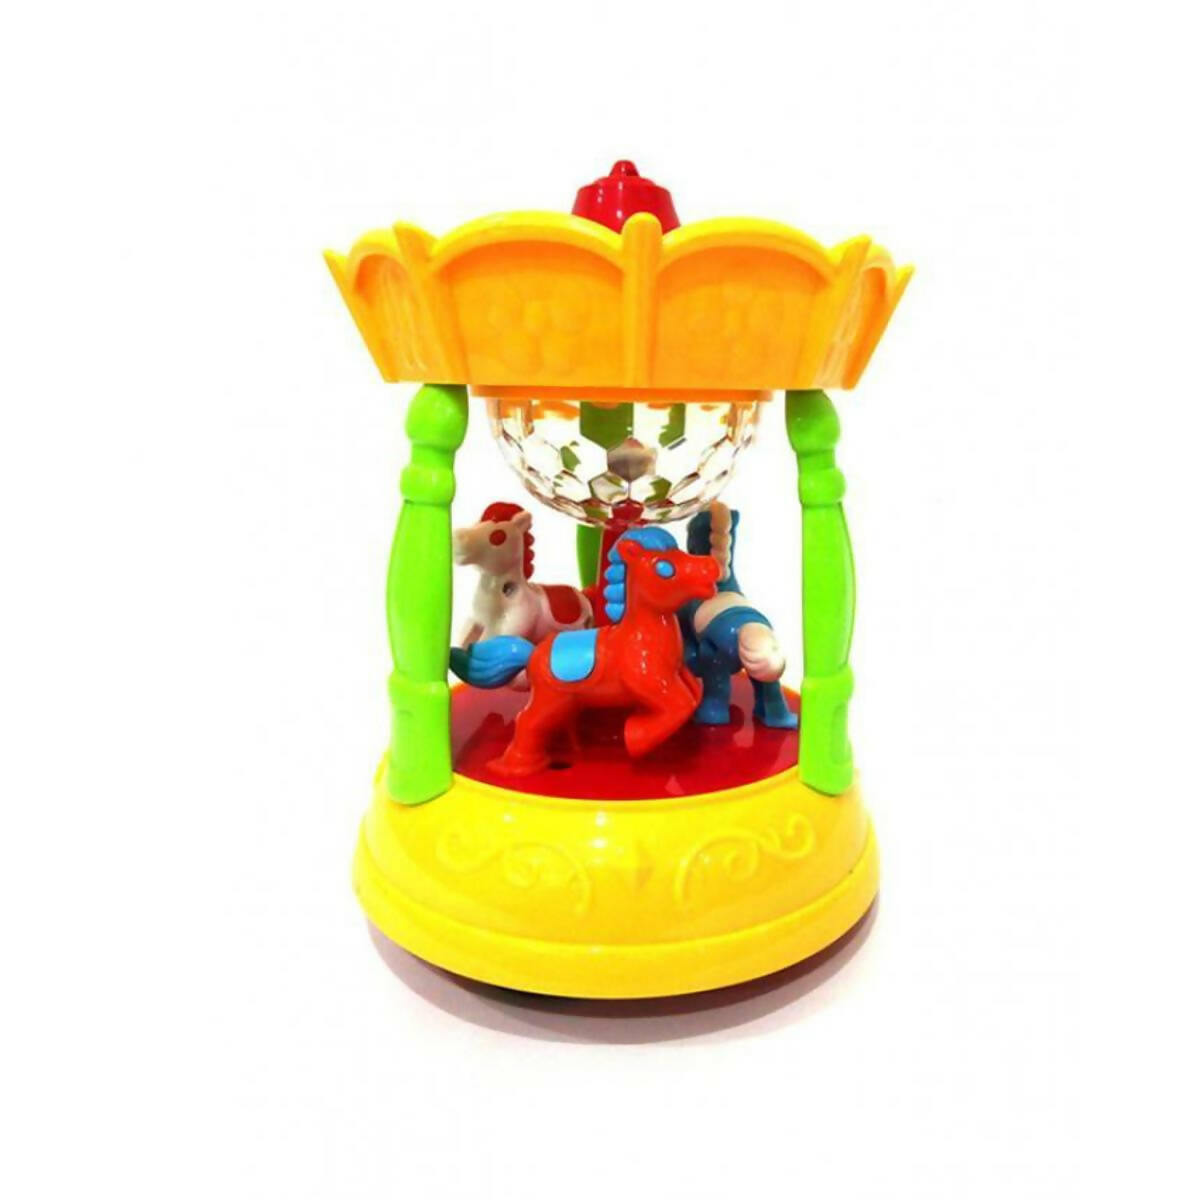 Musical Merry-Go-Round For Babies